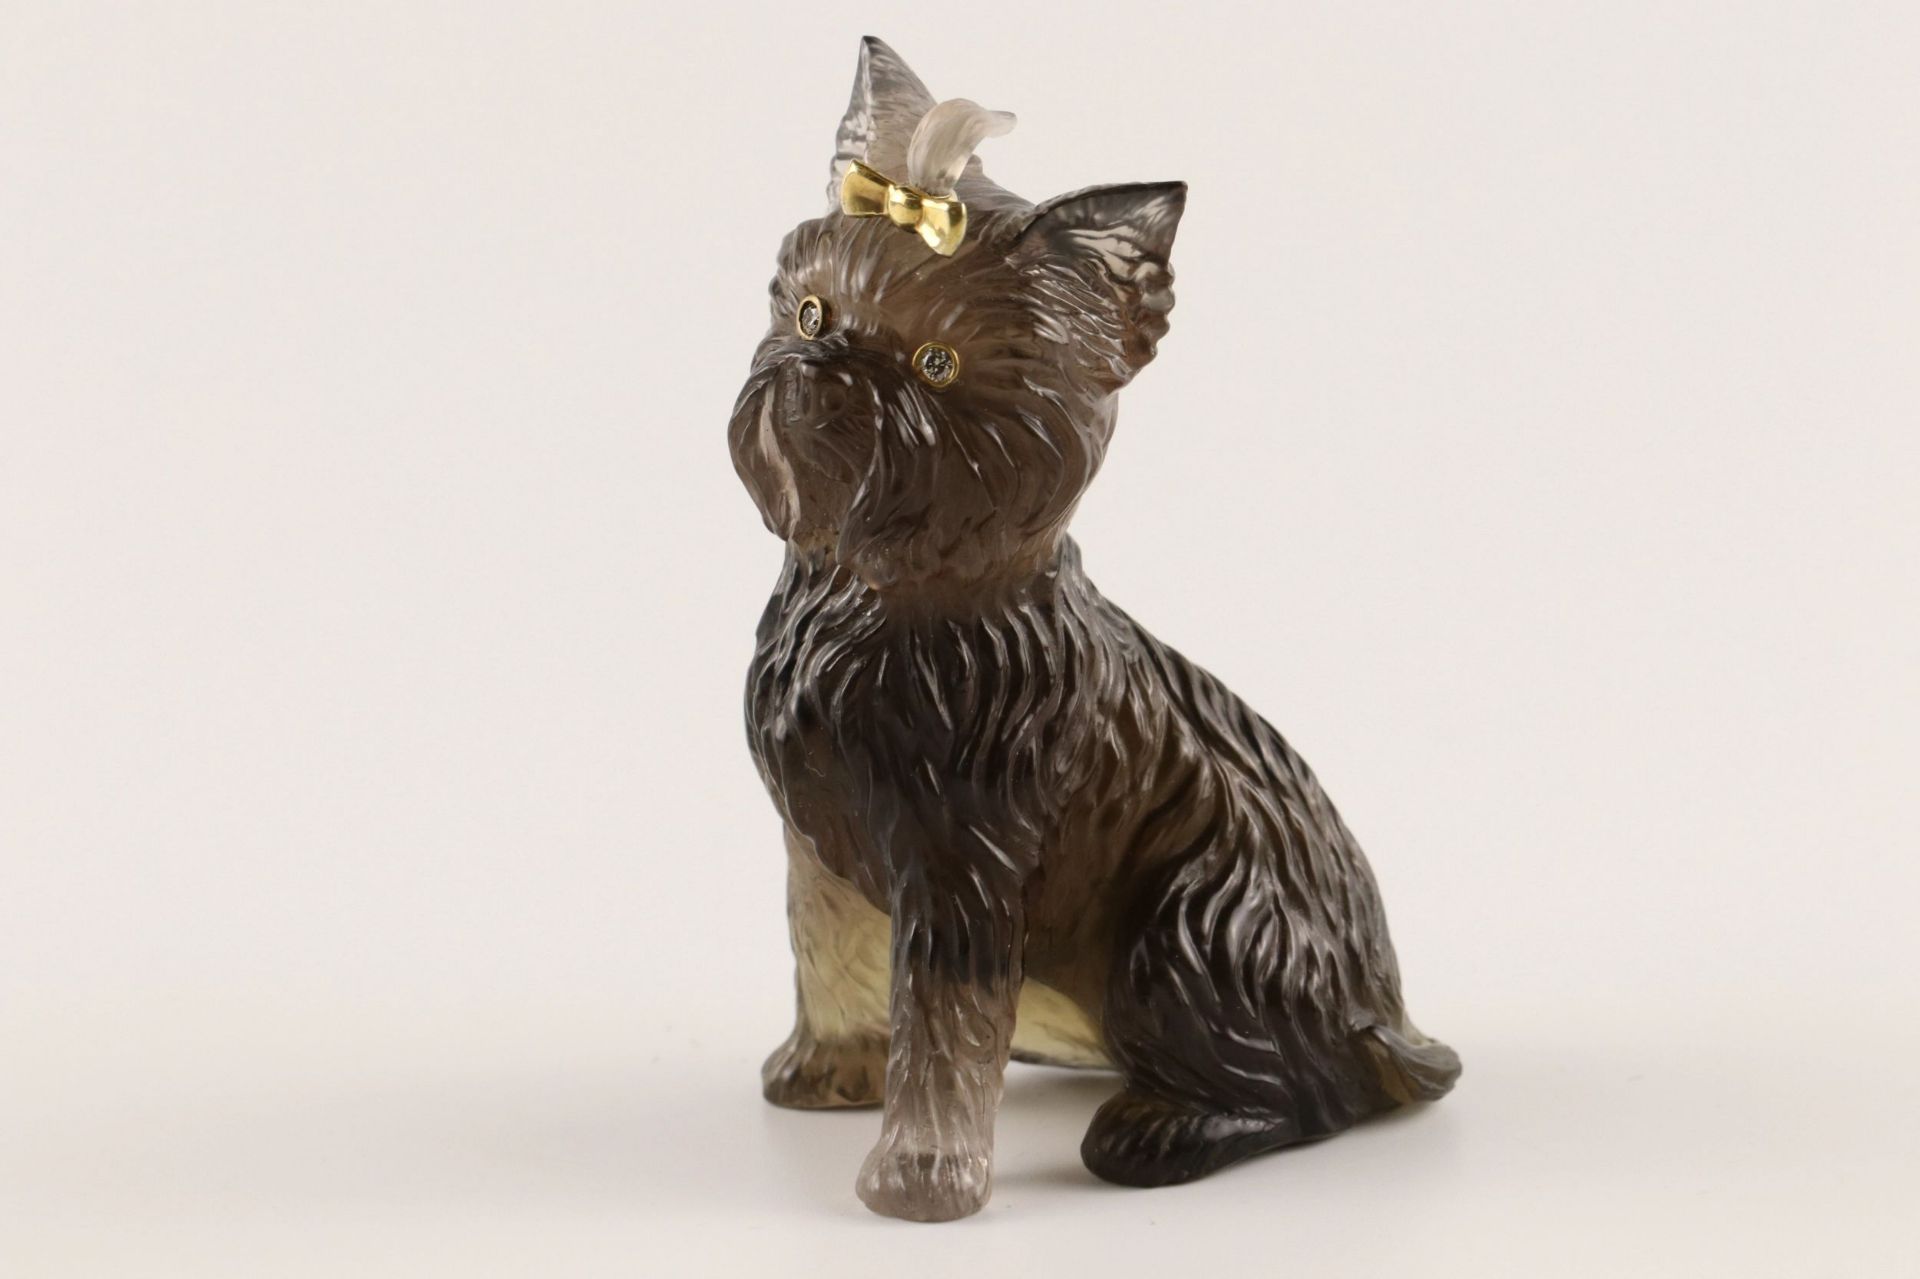 Stone-cut figurine Yorkshire Terrier in the style of Faberge 20th century. - Image 2 of 5